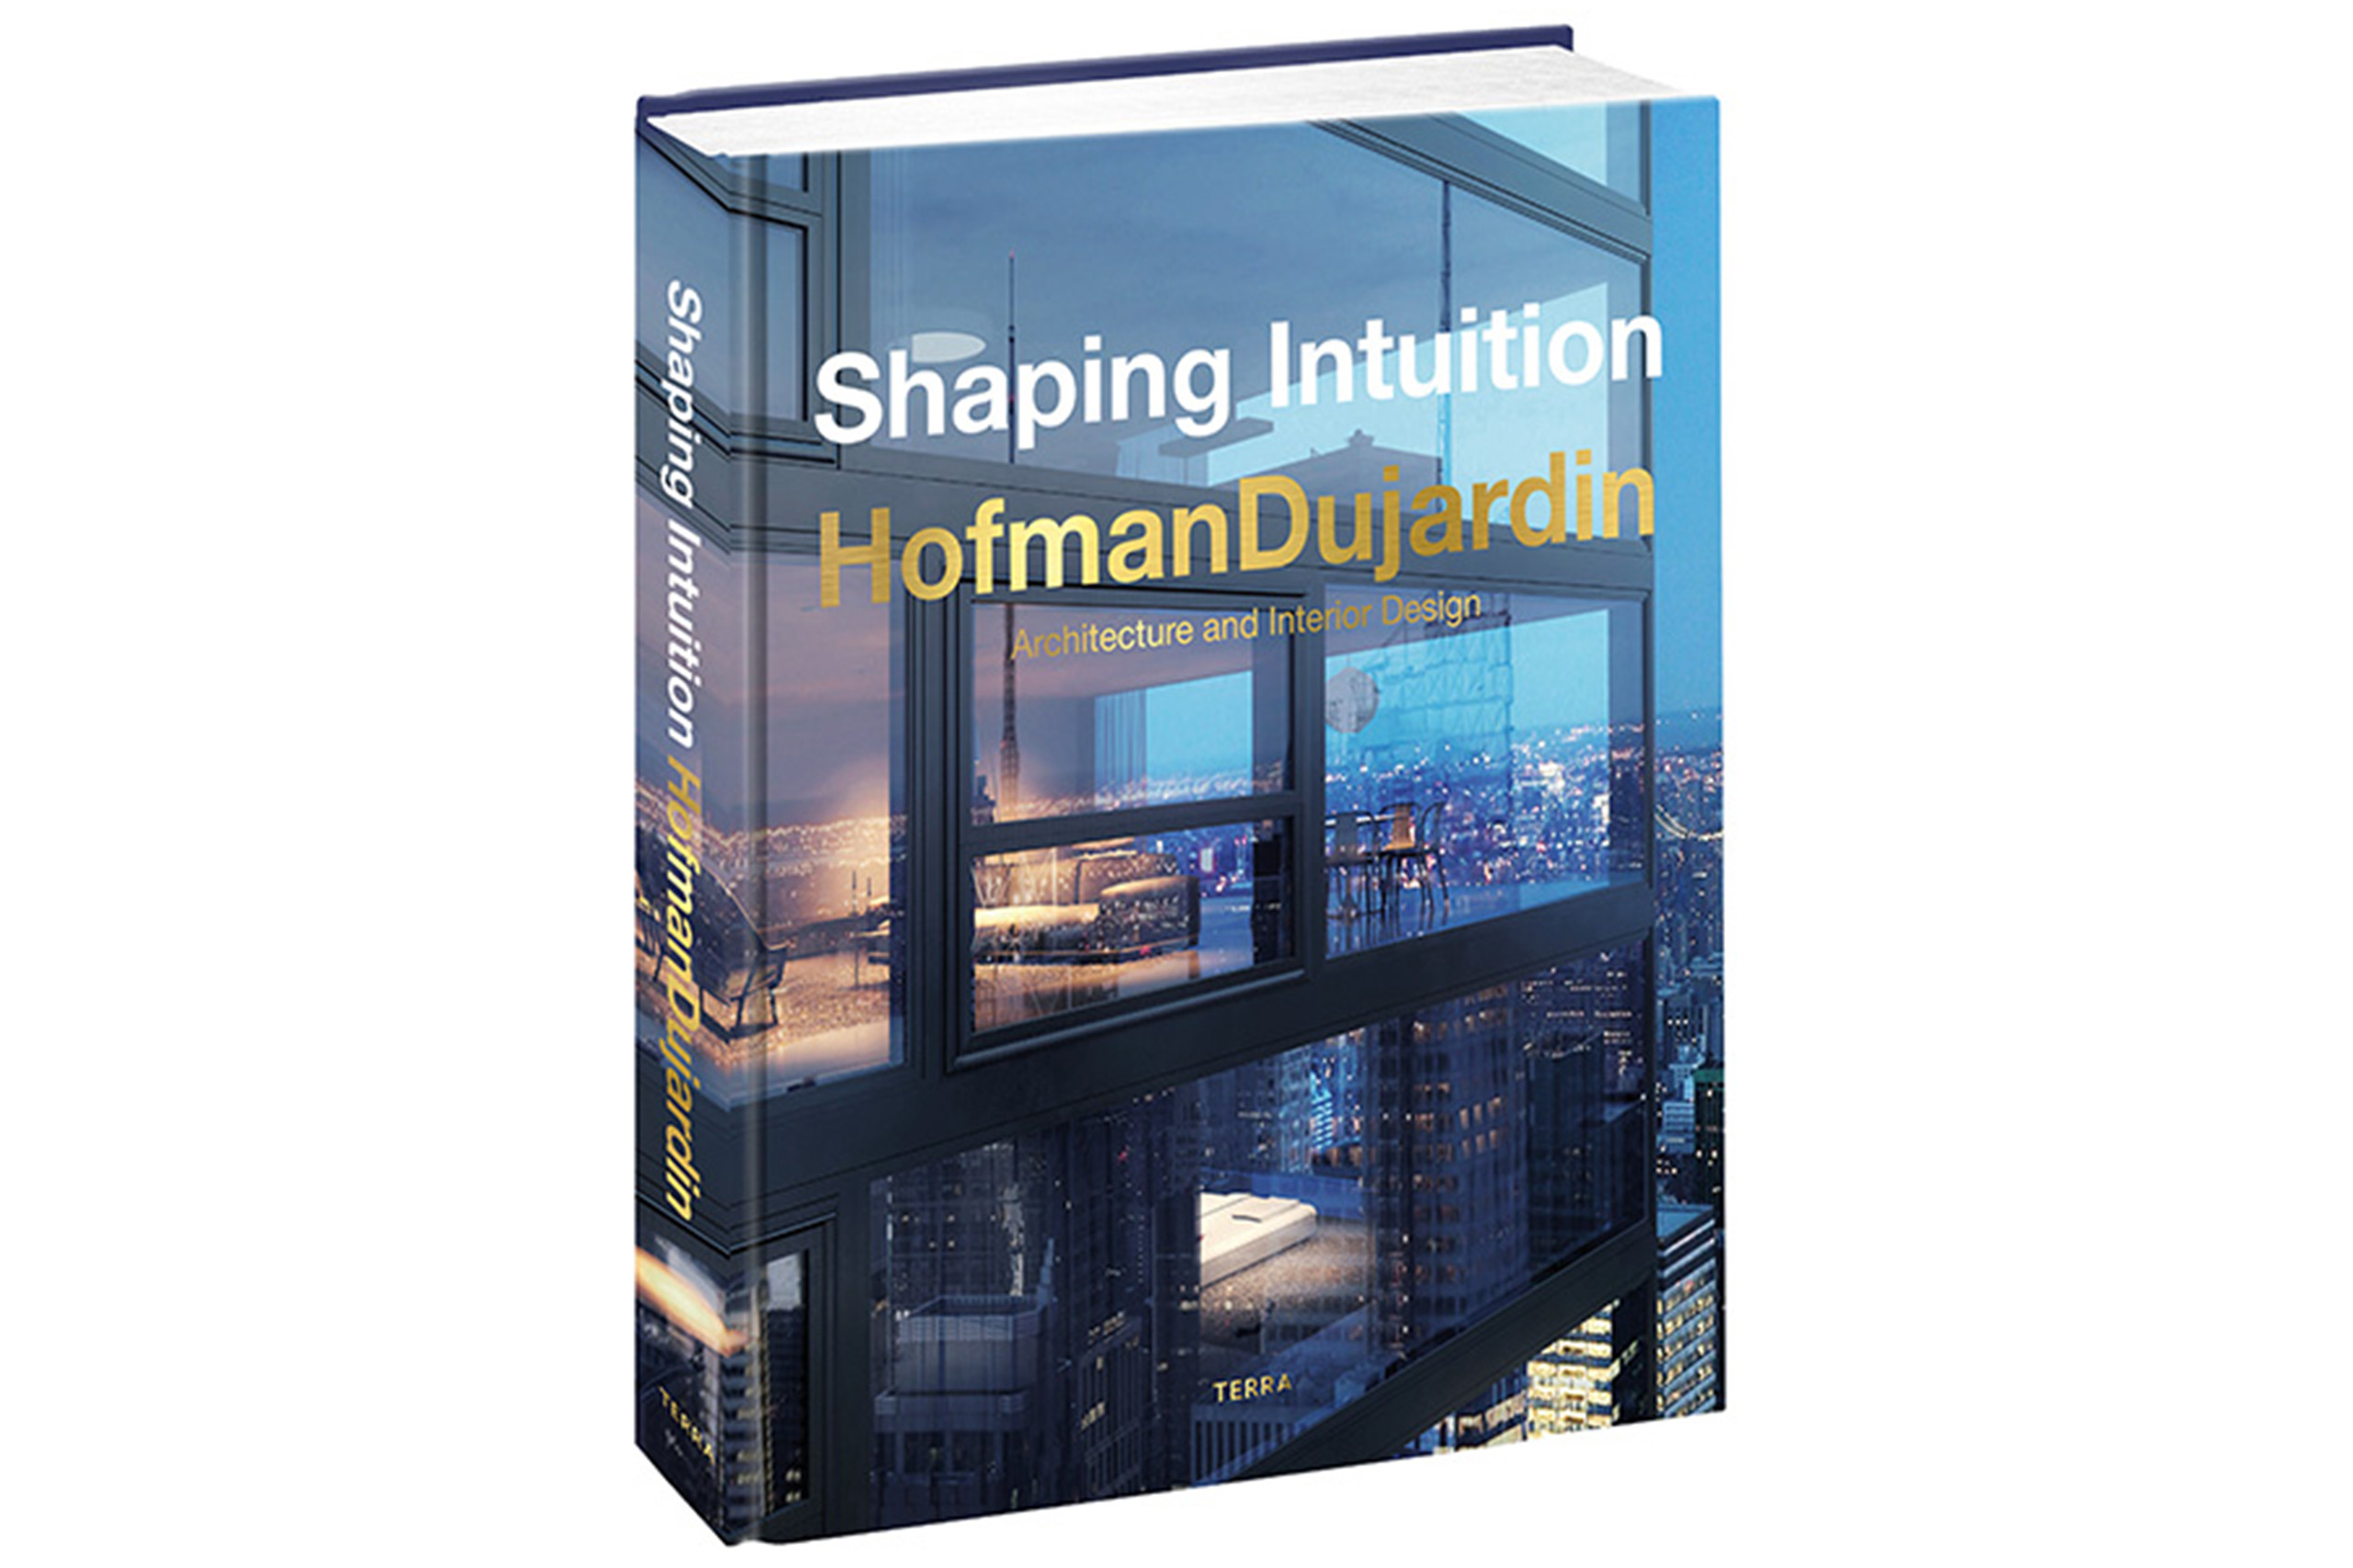 Shaping Intuition Architecture and interior design by HofmanDujardin published by Terra